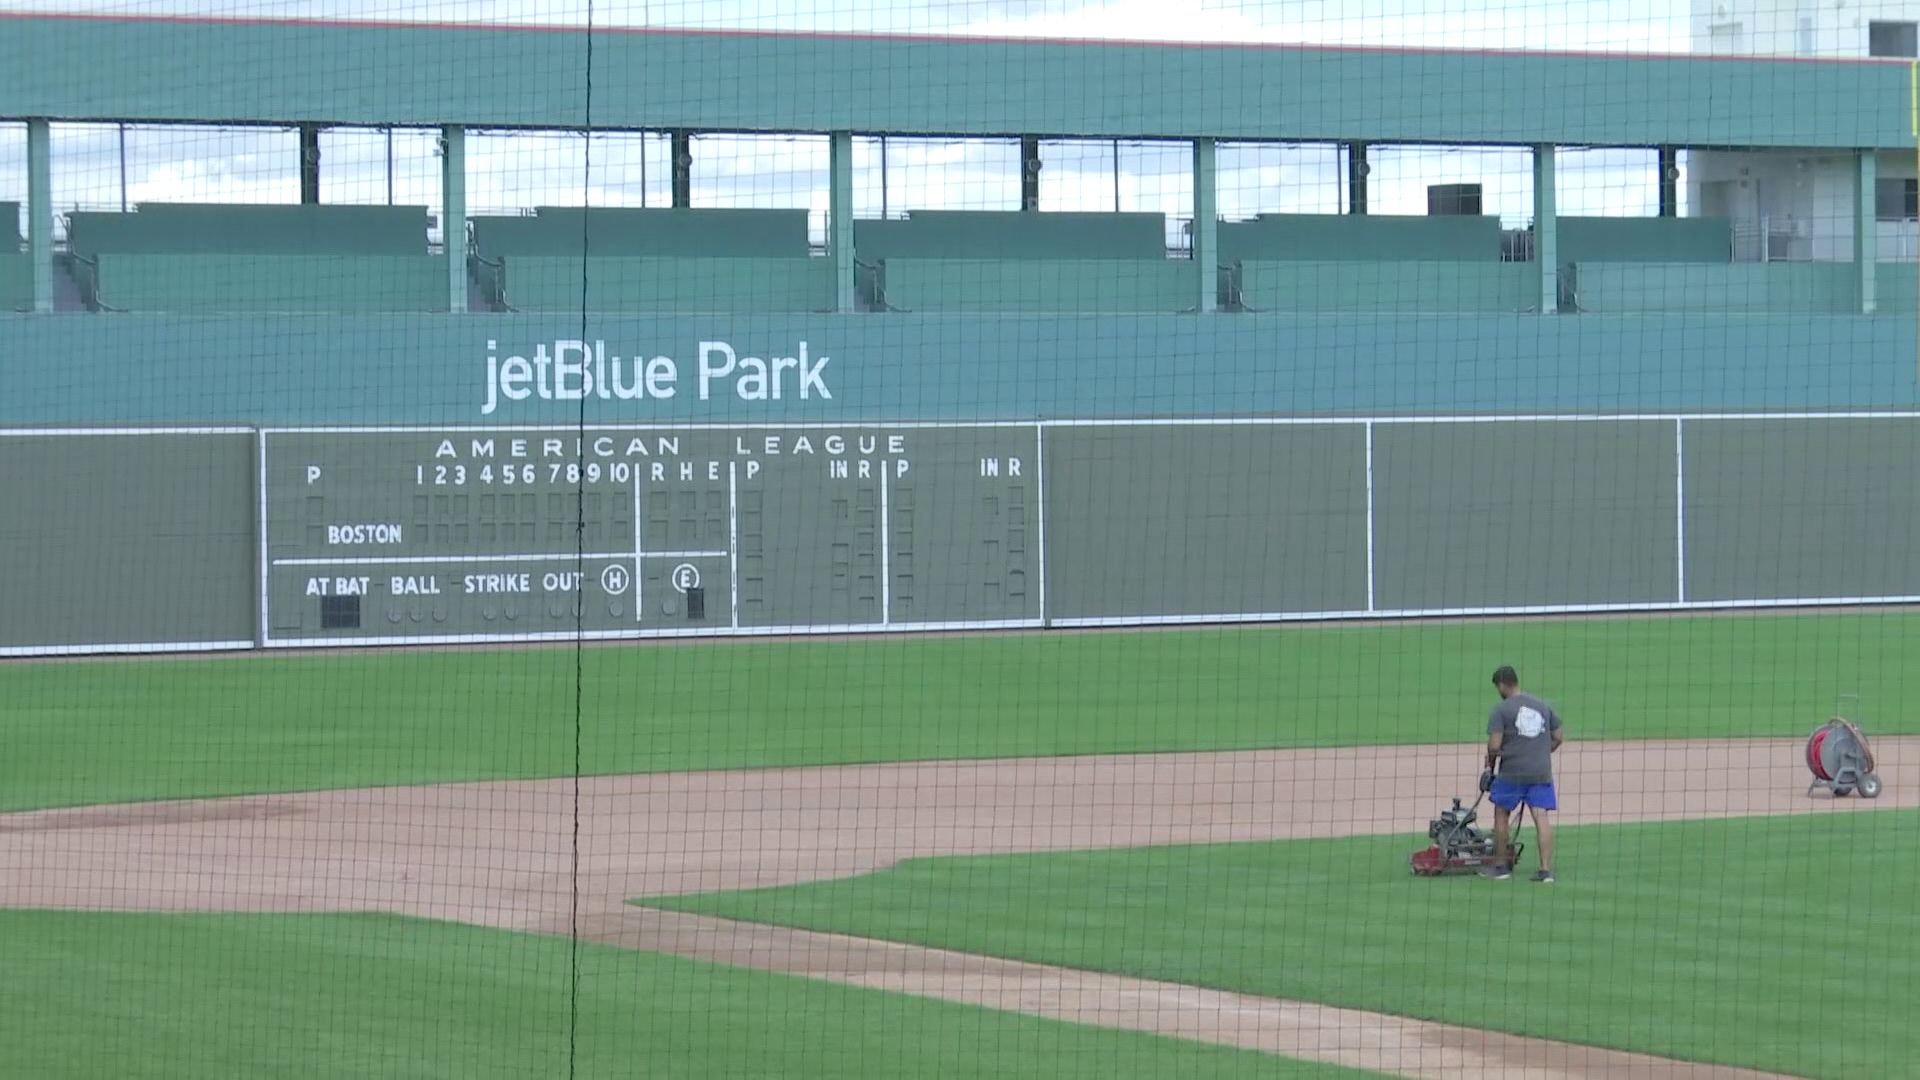 JetBlue Park at Fenway South preparing for Spring Training in